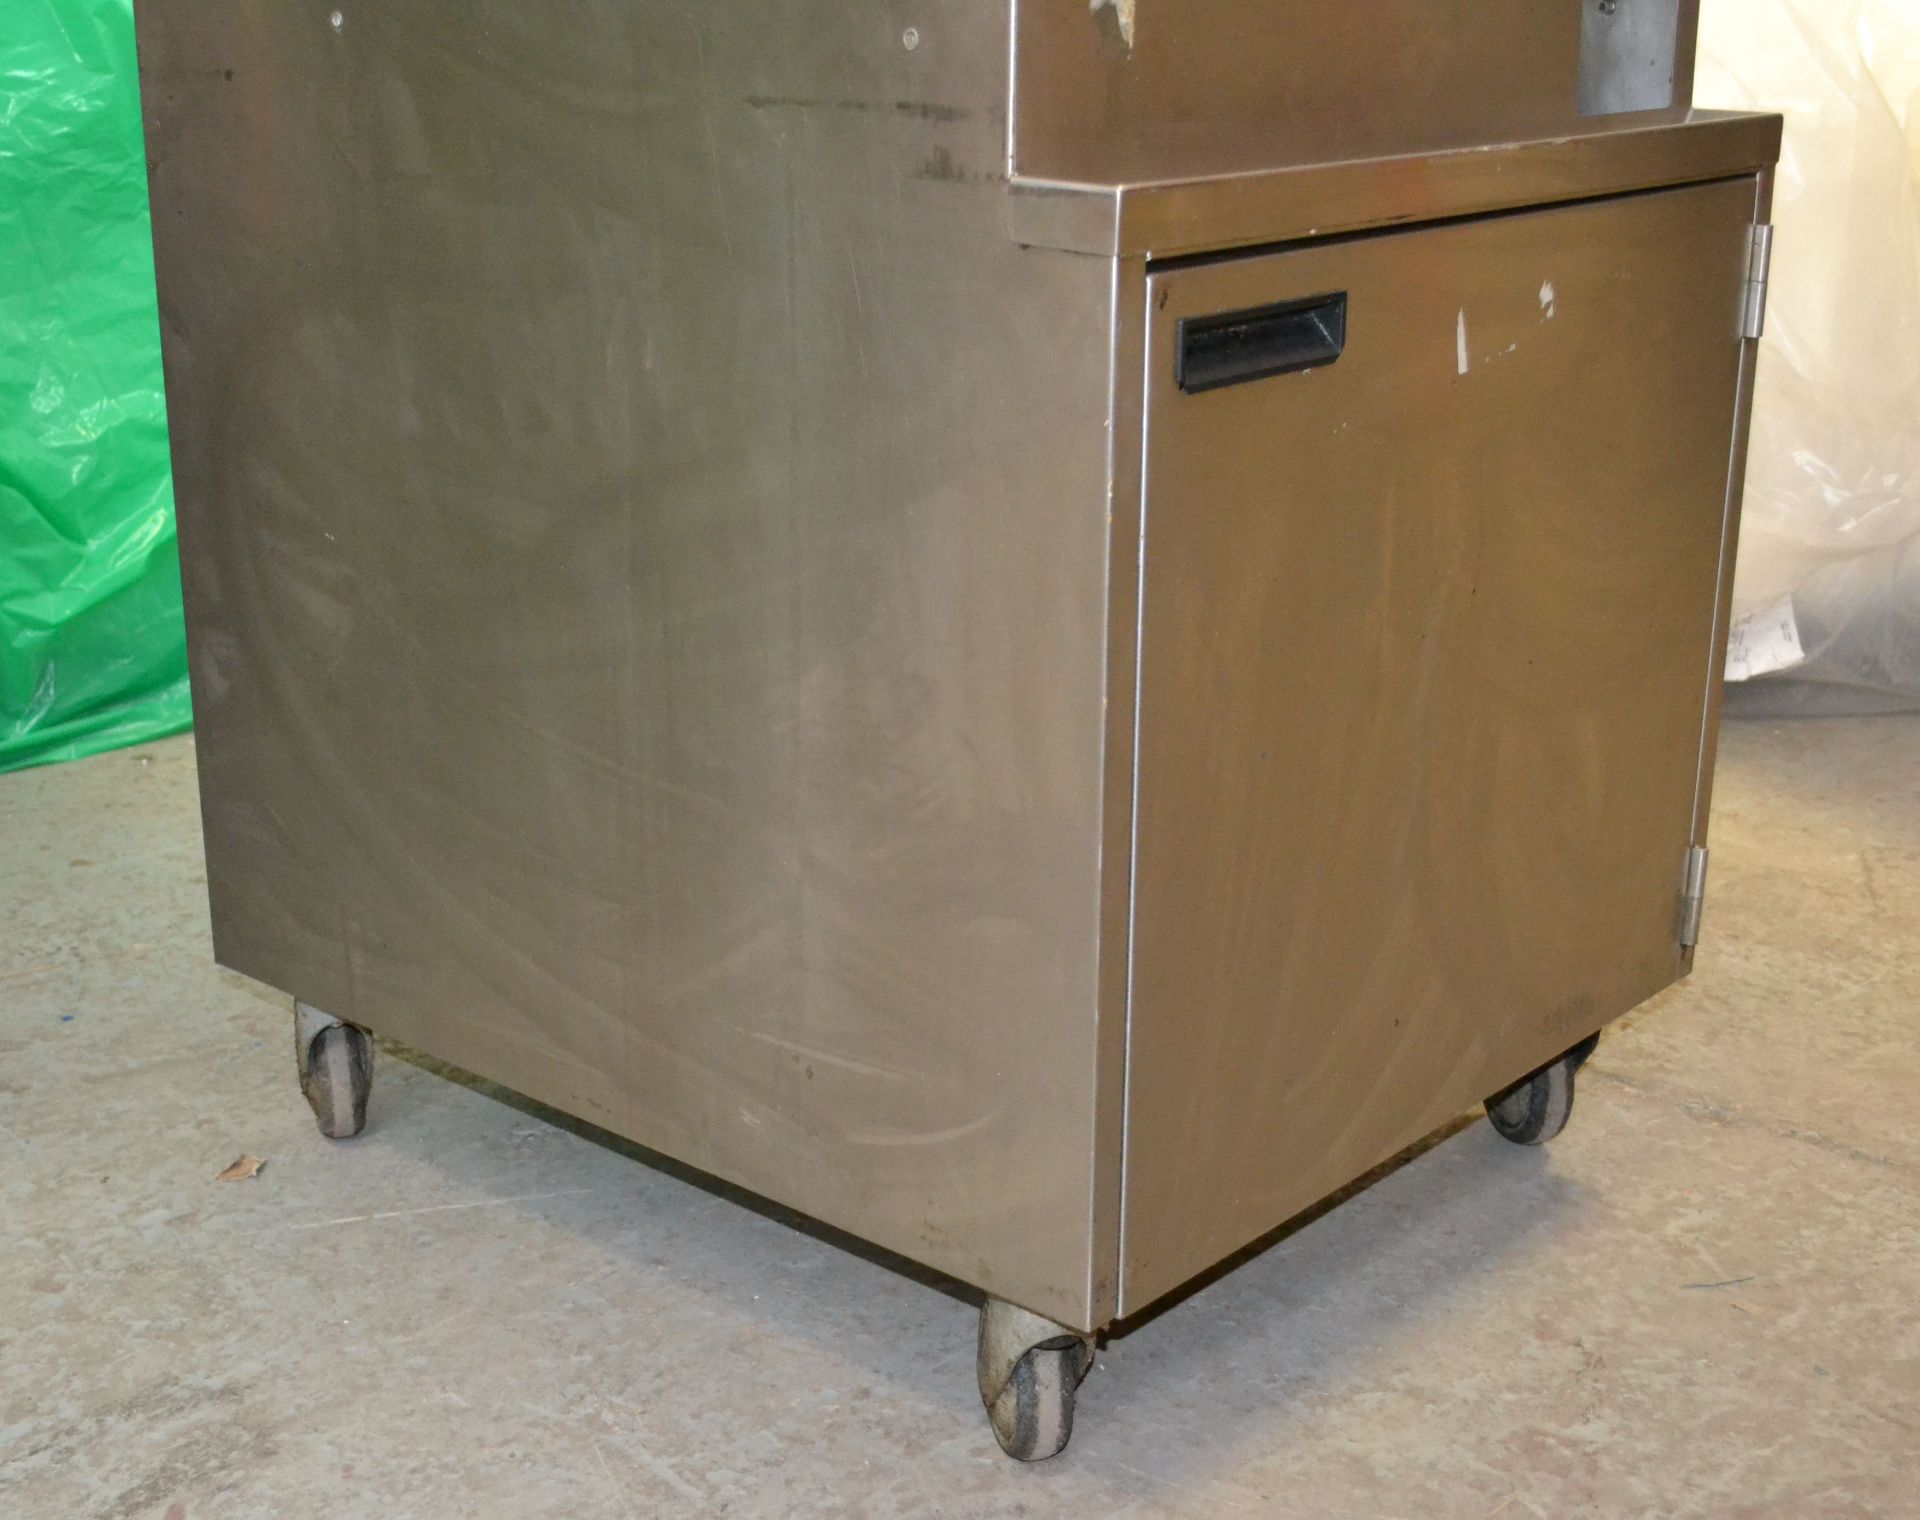 1 x Large Catering Serving / Topping Station - Ex-KFC- 67(w) x 76(d) x 178(h) cm - Ref: HM229 - - Image 11 of 14